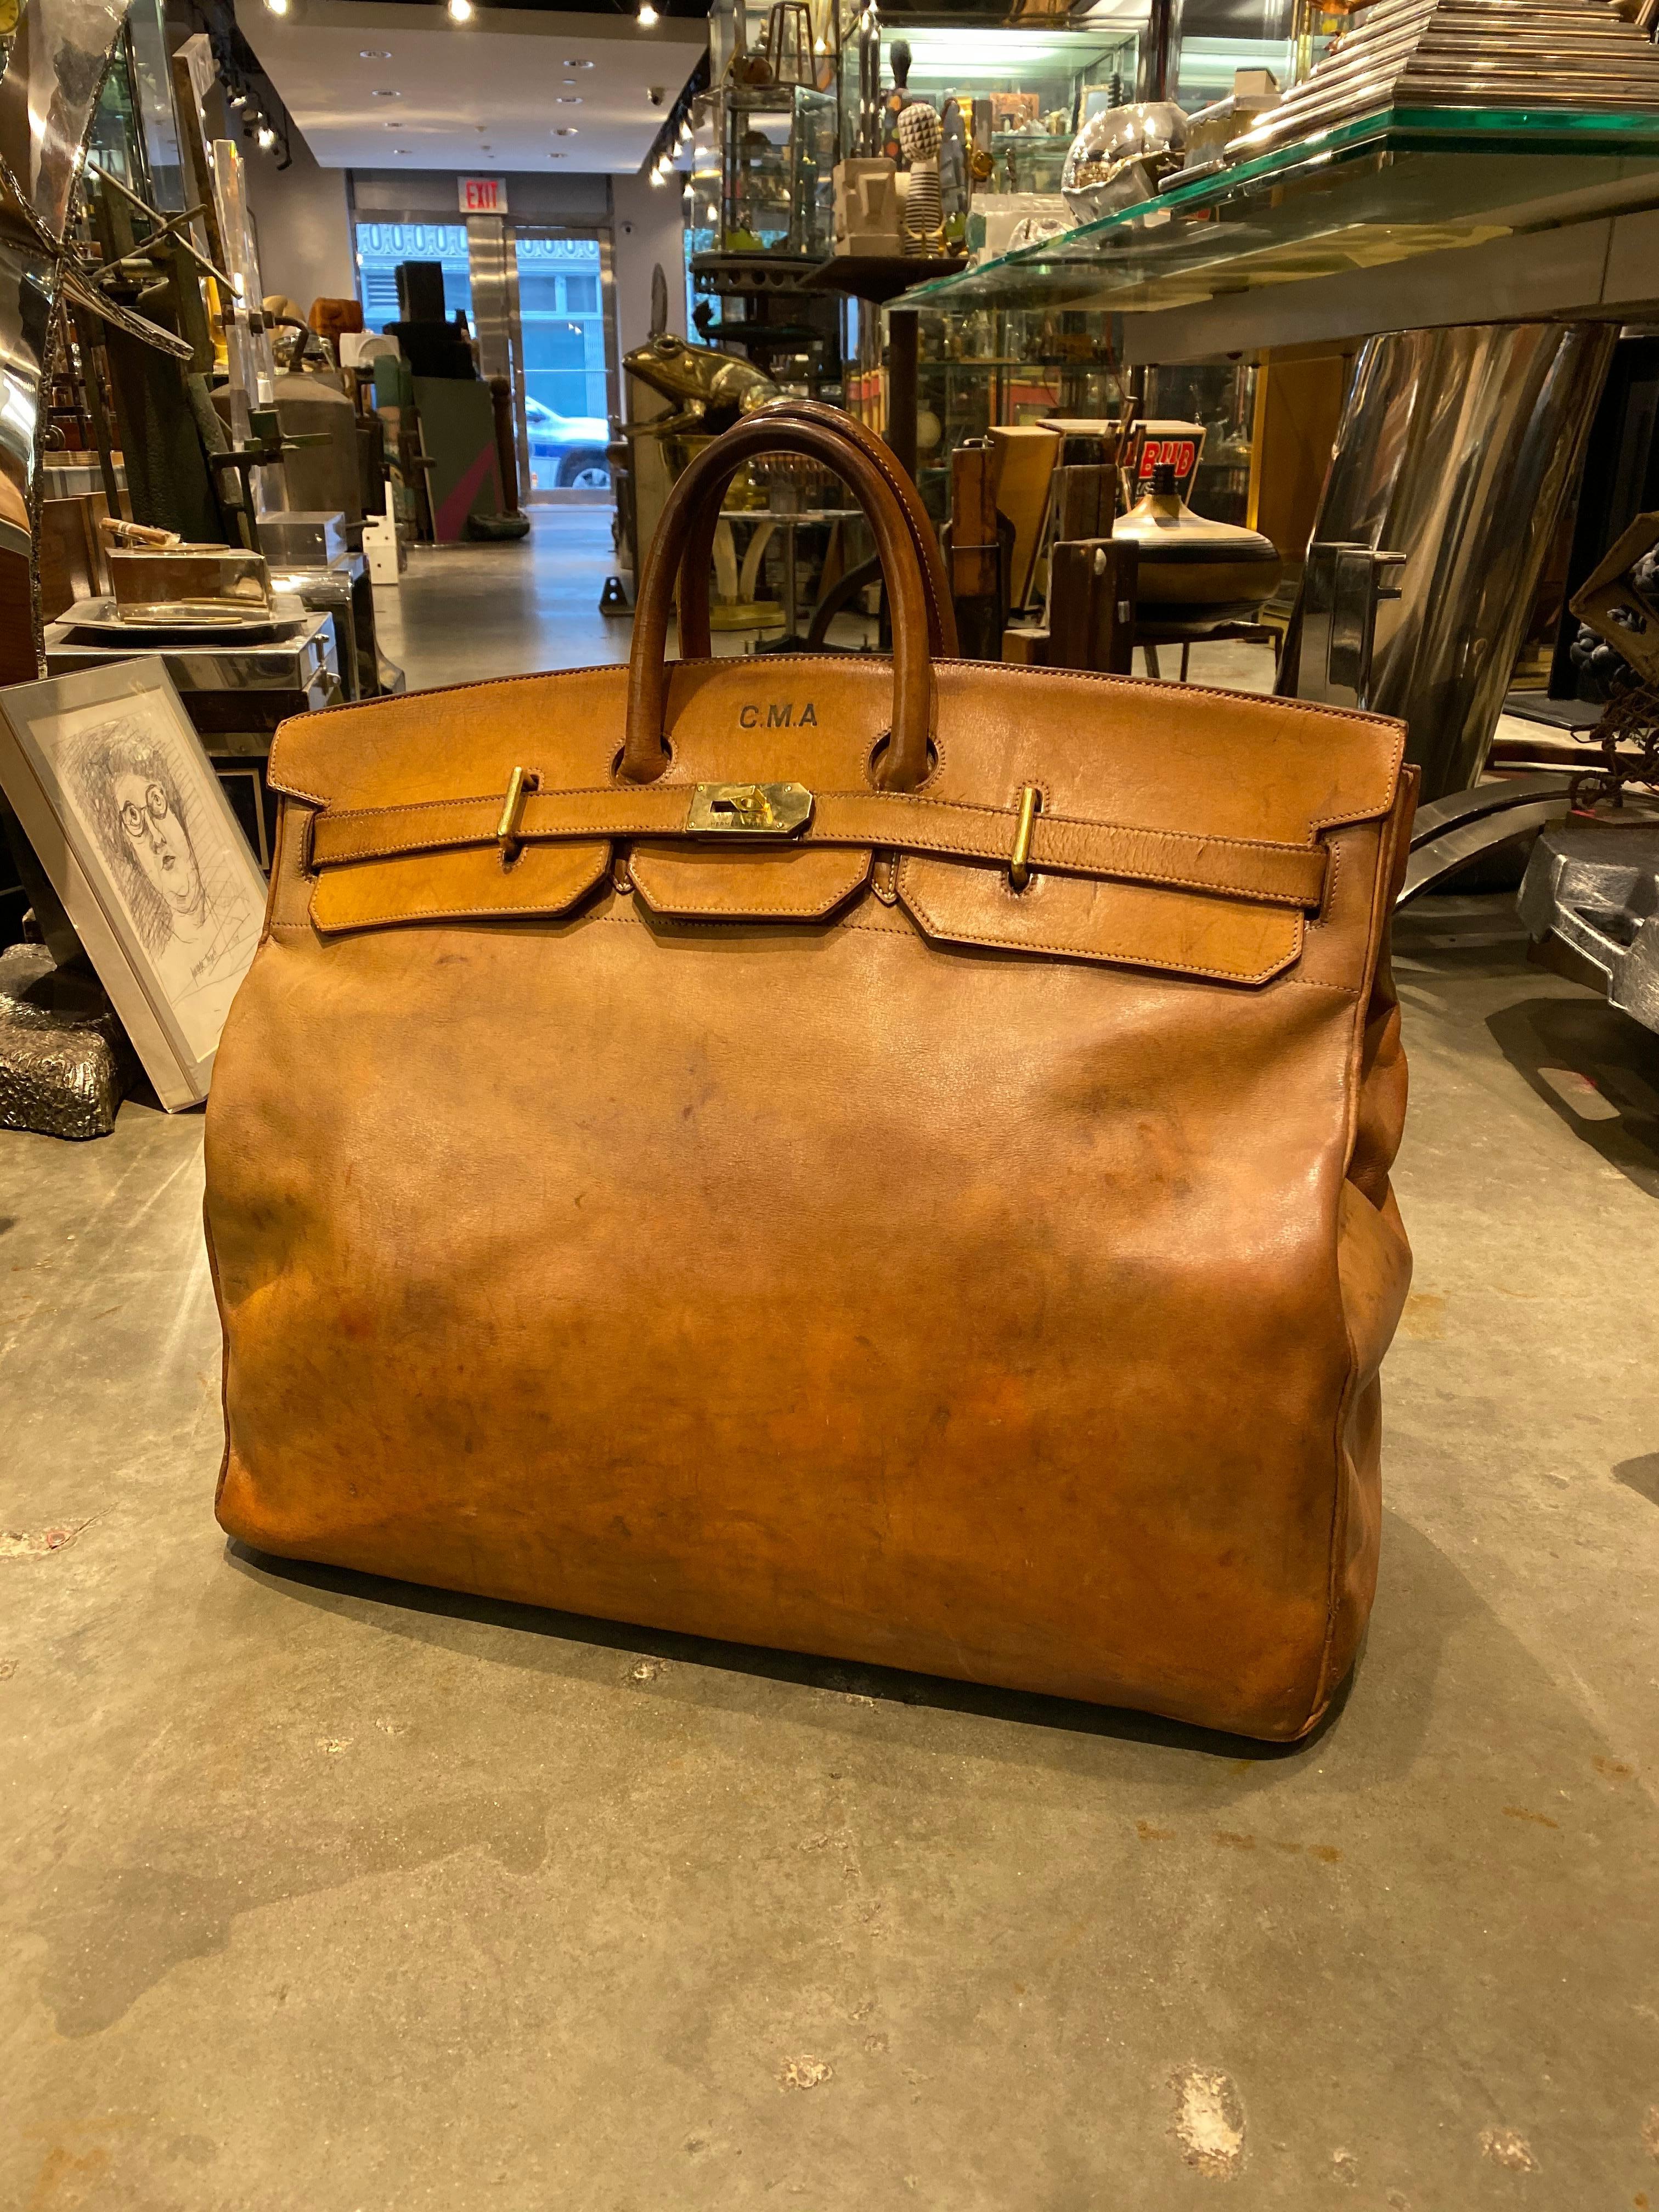 For your consideration is one of the most rare, and spectacular bags we have ever come across. This bag is in incredible structural condition, with many years of life left it. From the handles to the body, this bag has developed a perfect patina. At